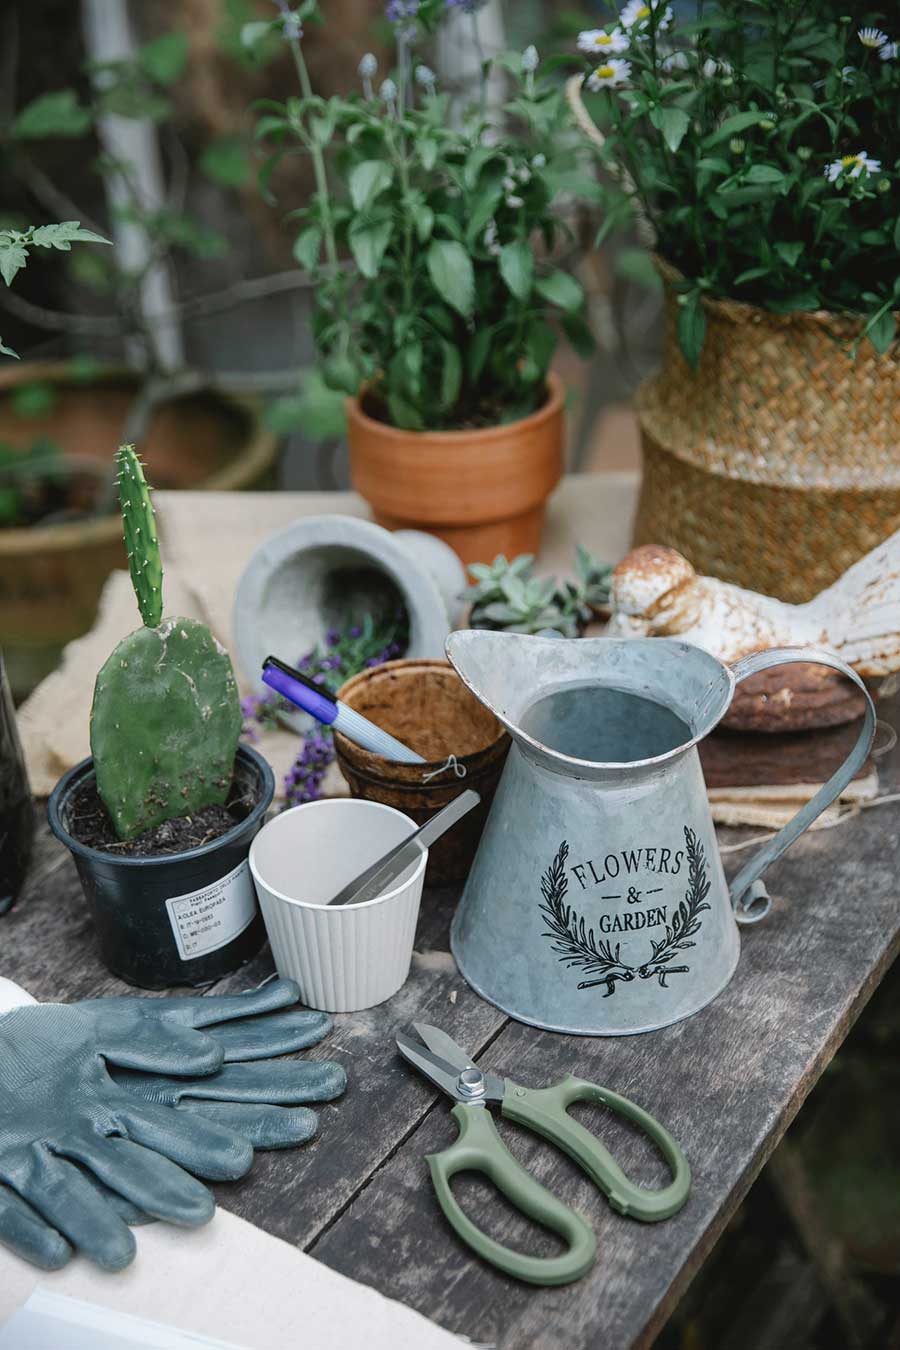 Gardening supplies on an outdoor wooden table.